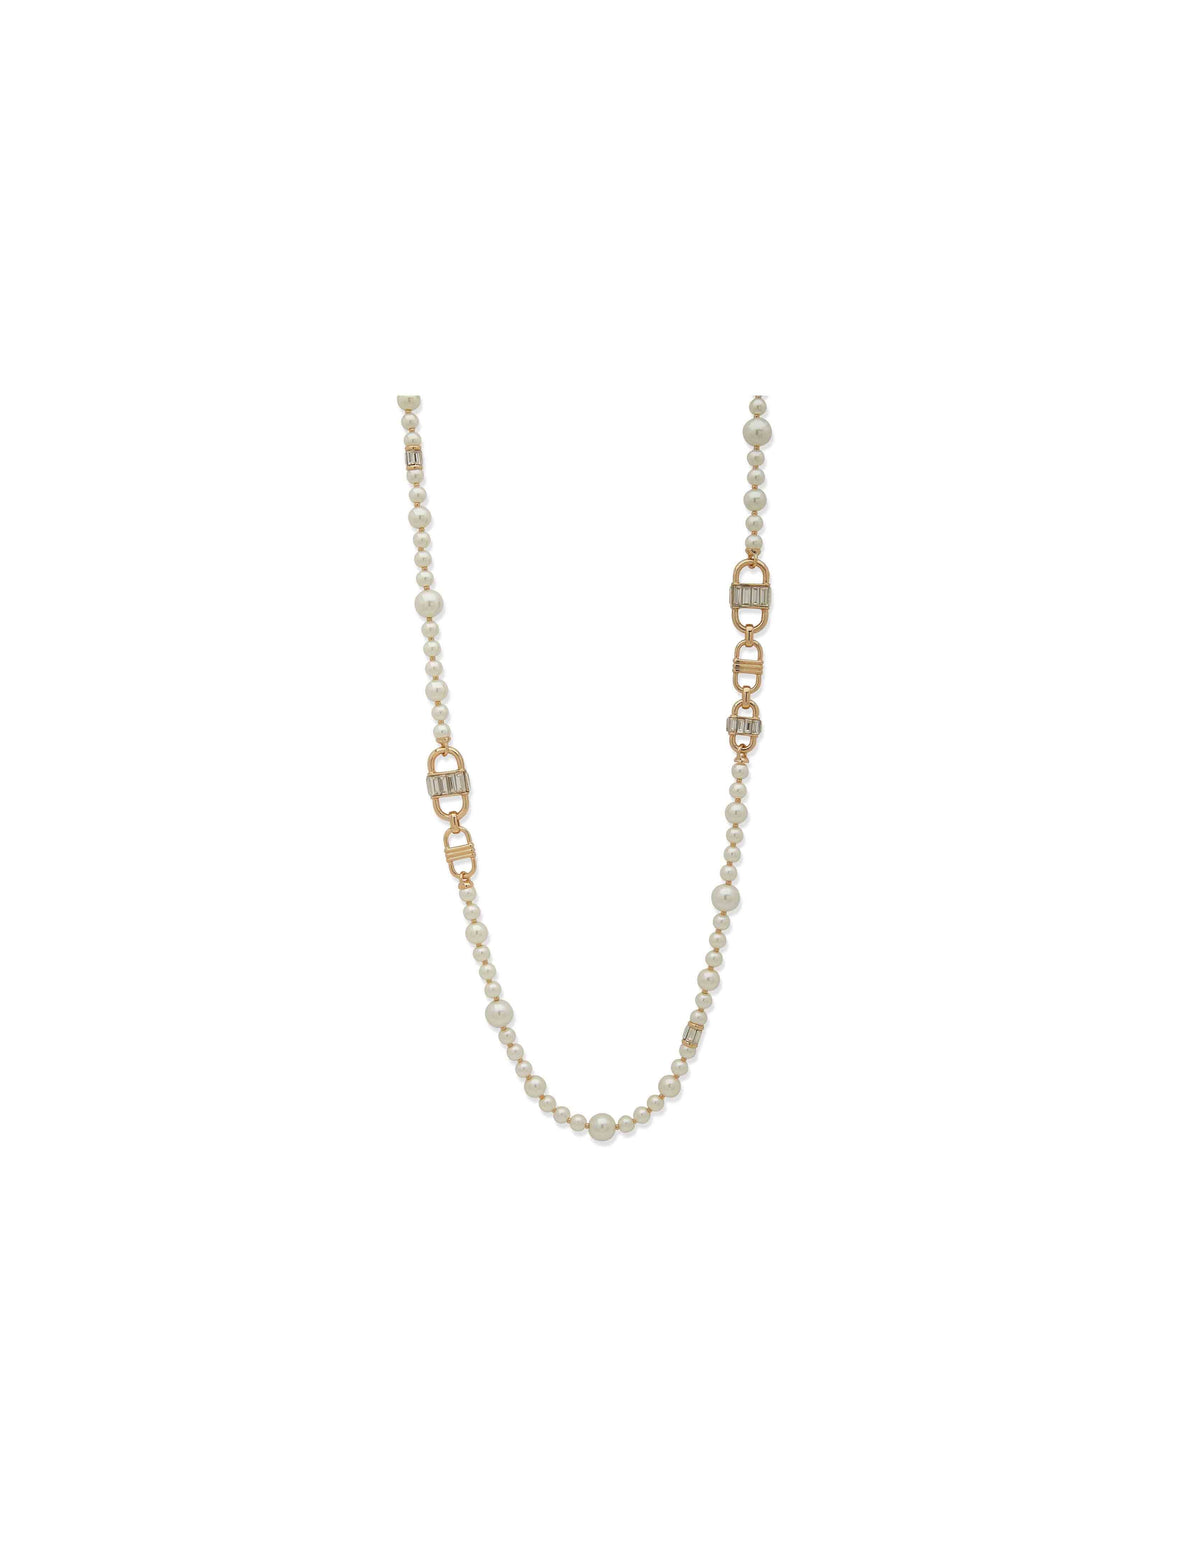 Anne Klein Gold Tone Faux Pearls and Stone Baguette Necklace